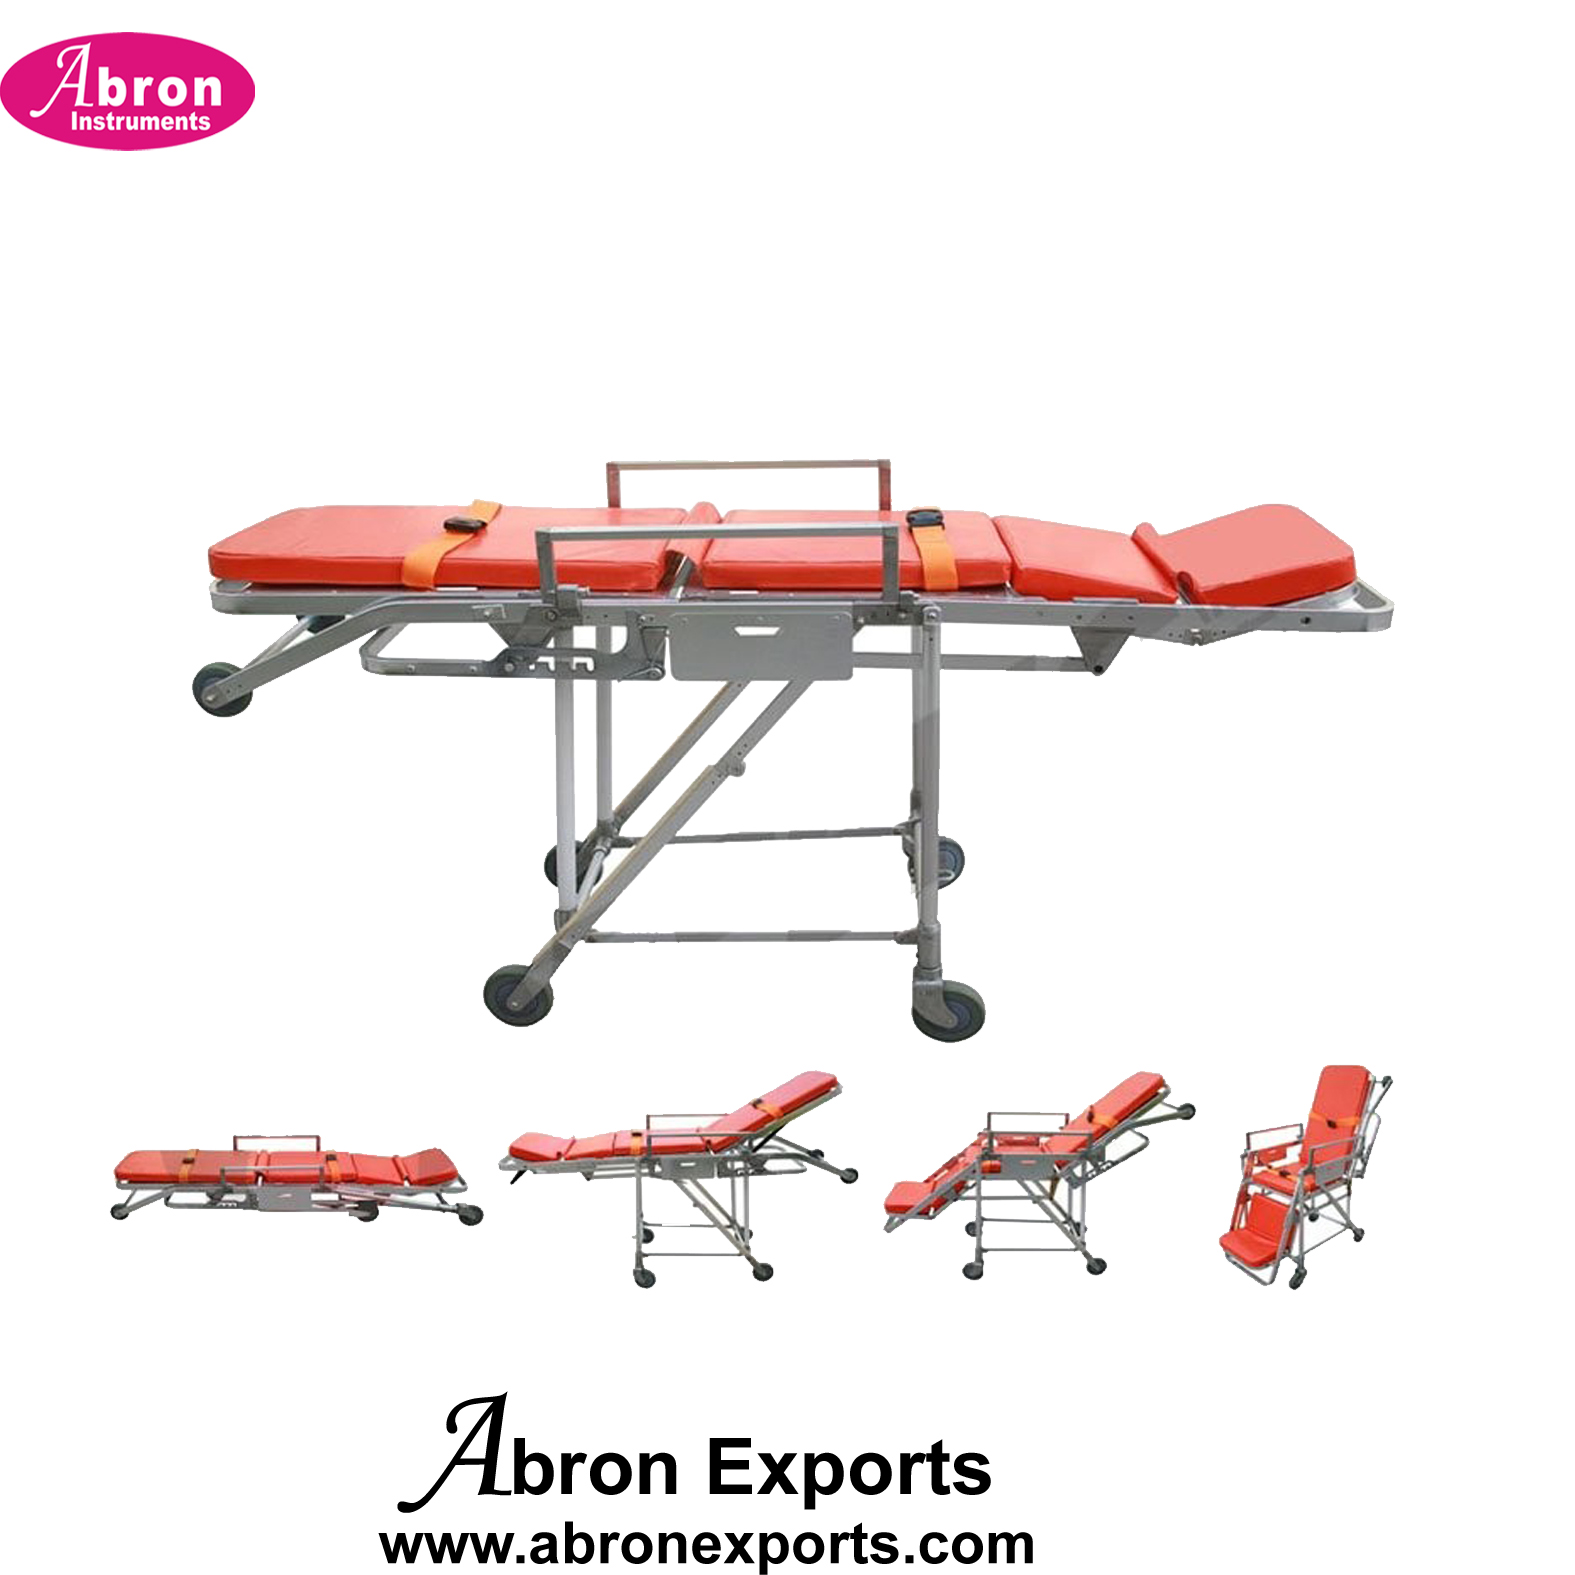 Stretcher Patient Trolley with matress Autoloader Collapsible Medical Use Folding Ambulance abron ambulance Strature cum Wheel chair 123 800x800 ABM-2261SM 